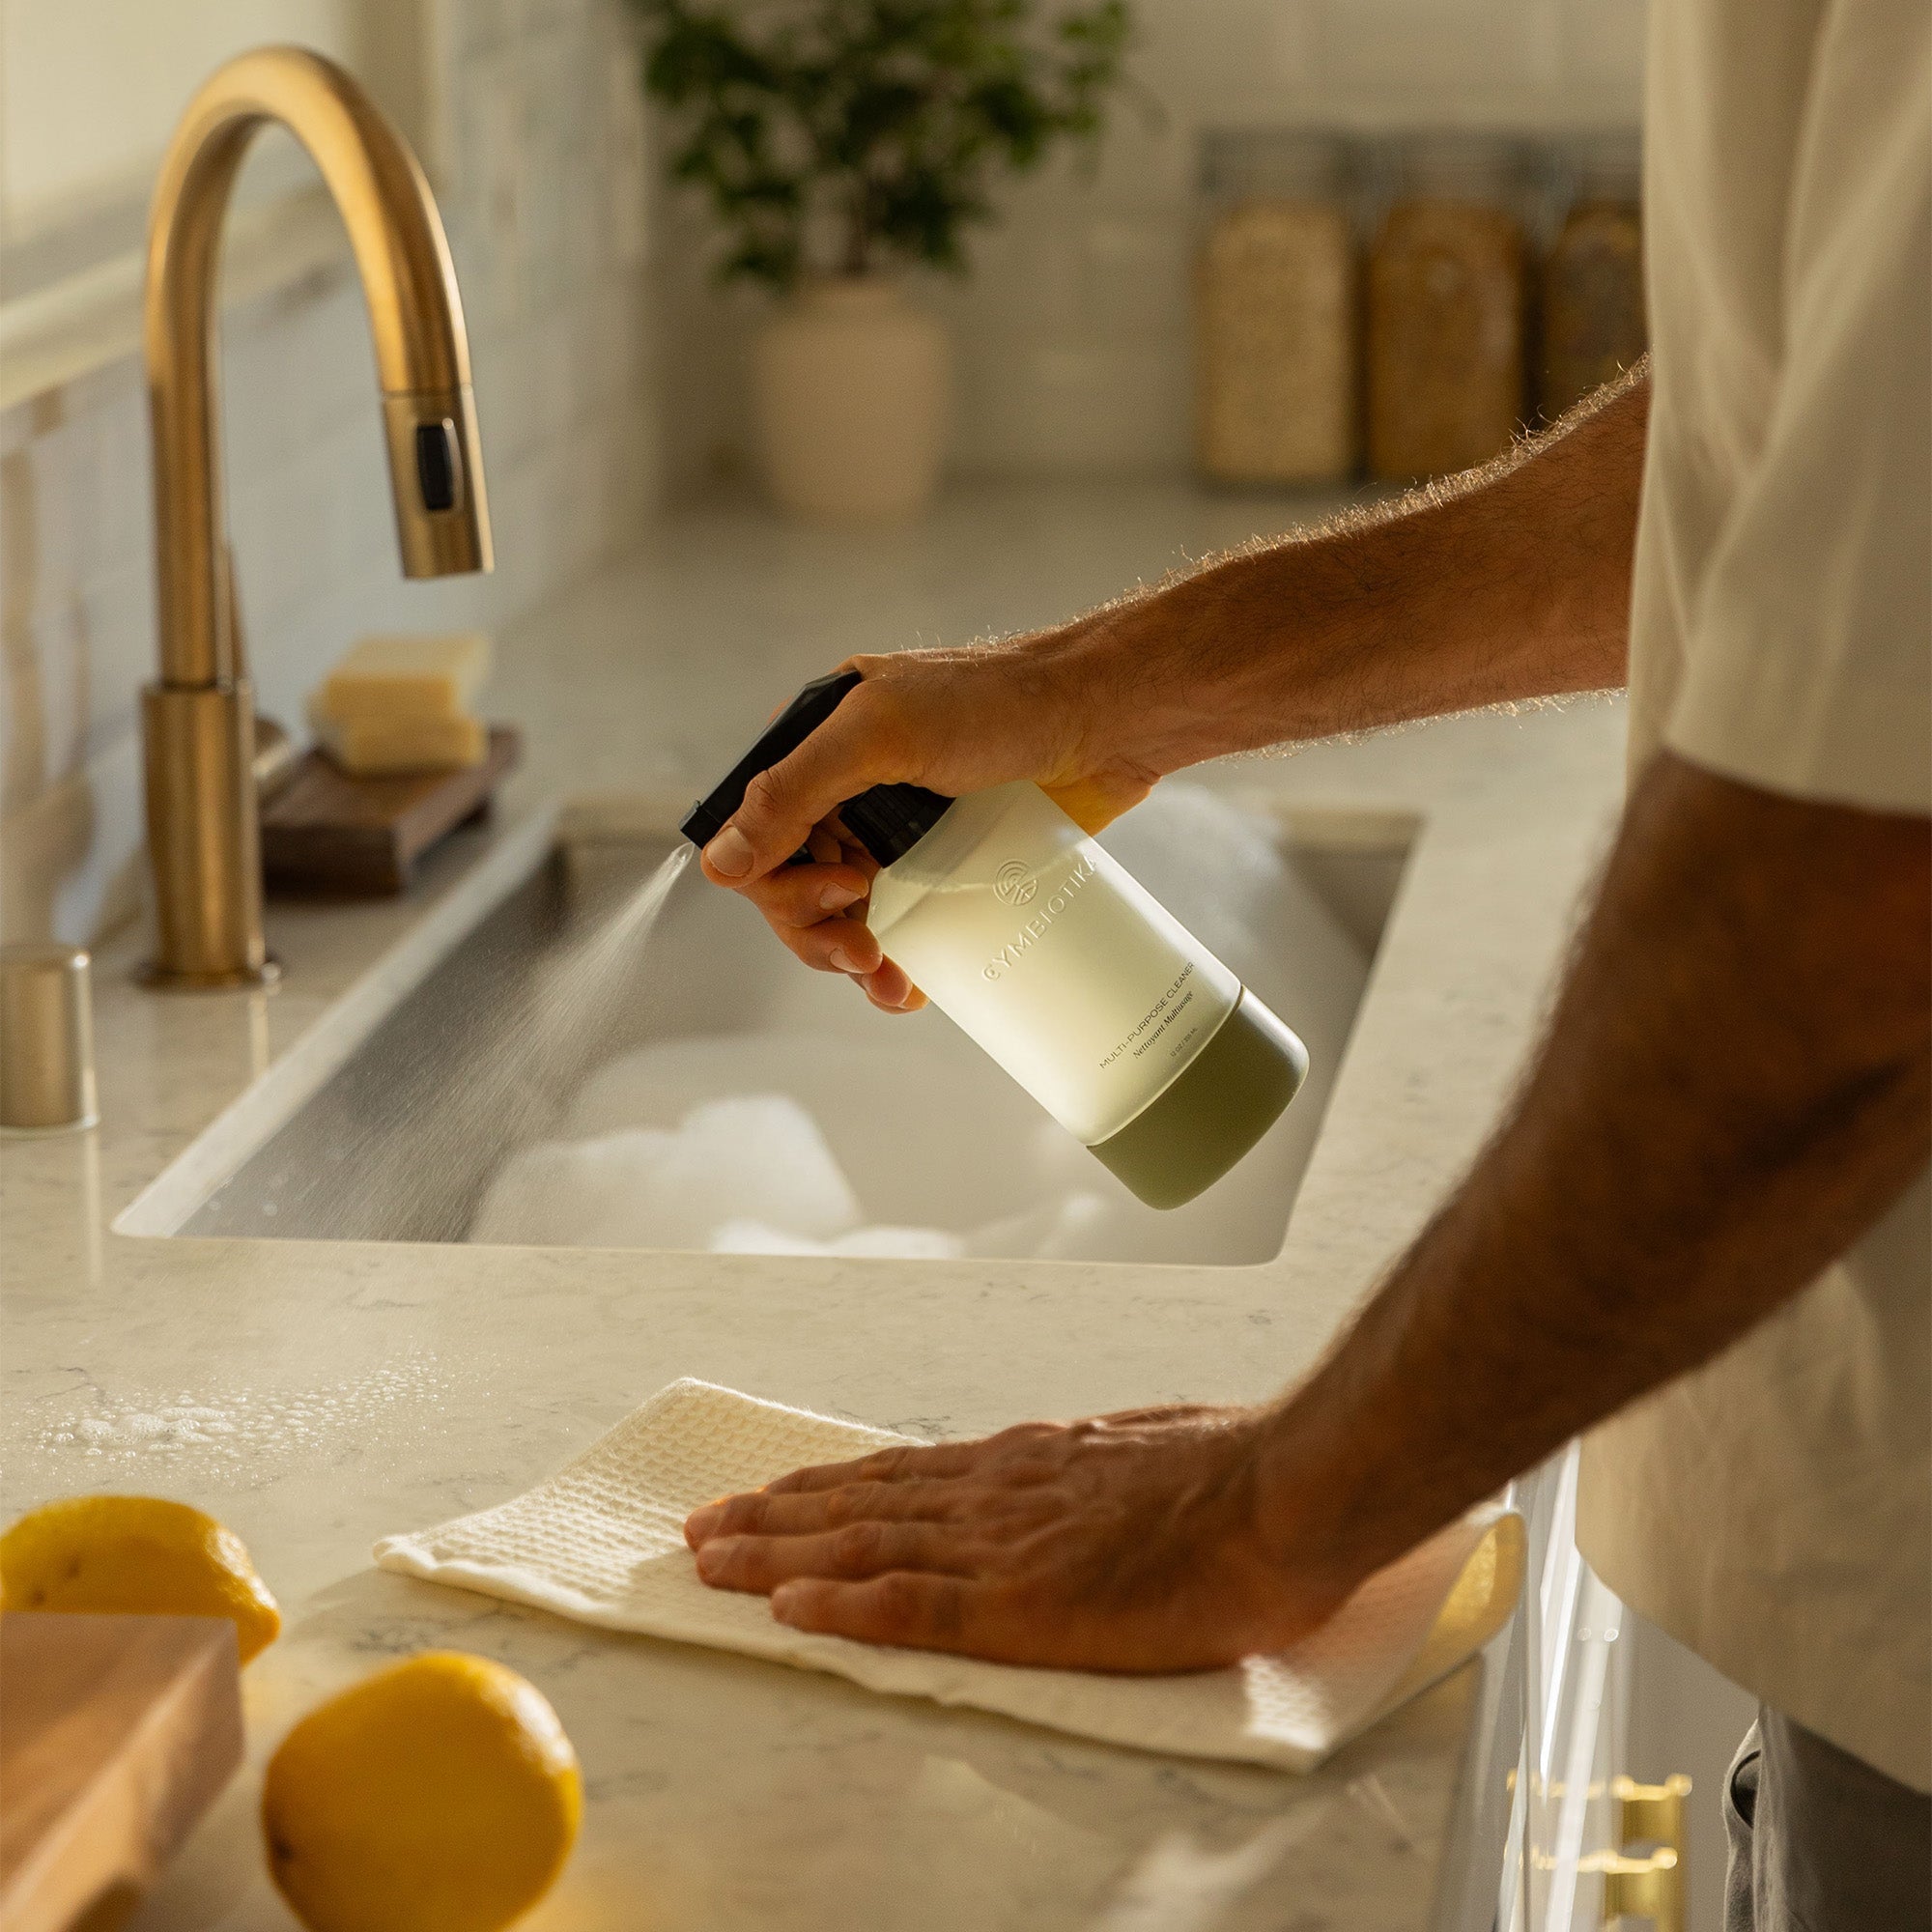 Multi-Purpose Cleaner Bottle being Sprayed onto Counter